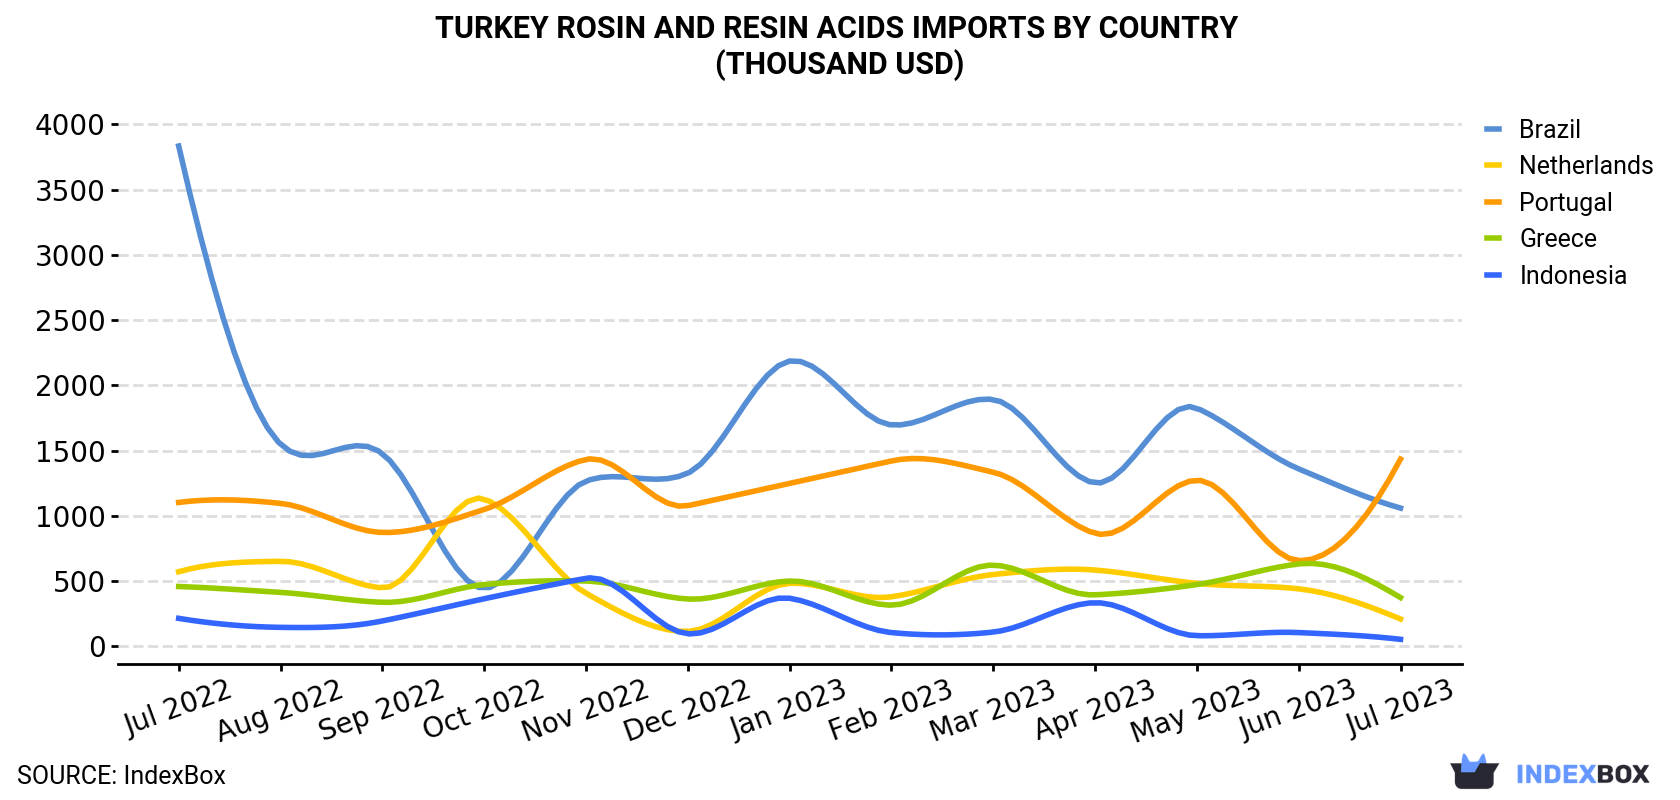 Turkey Rosin And Resin Acids Imports By Country (Thousand USD)